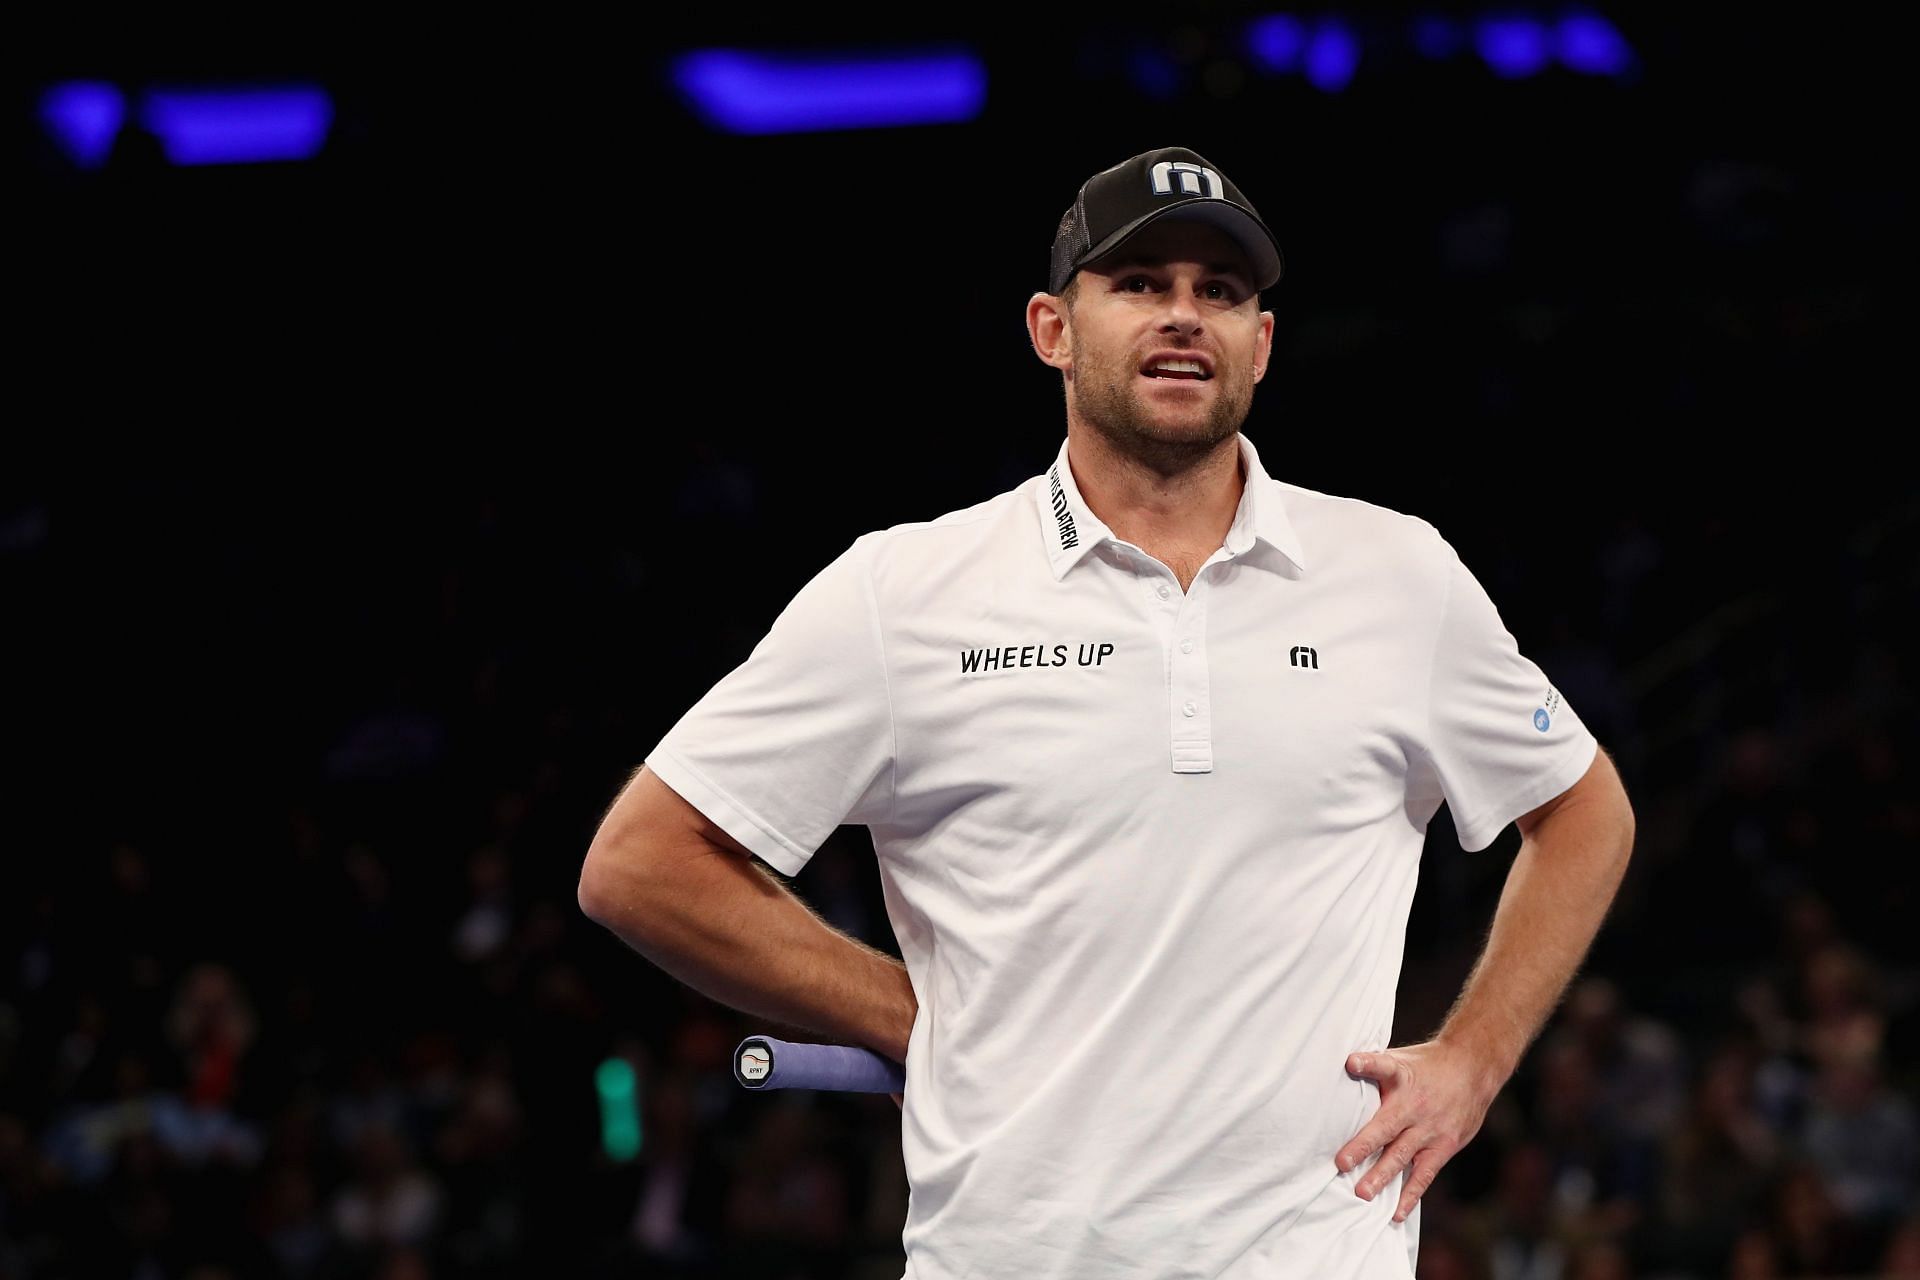 Andy Roddick commends the French Open